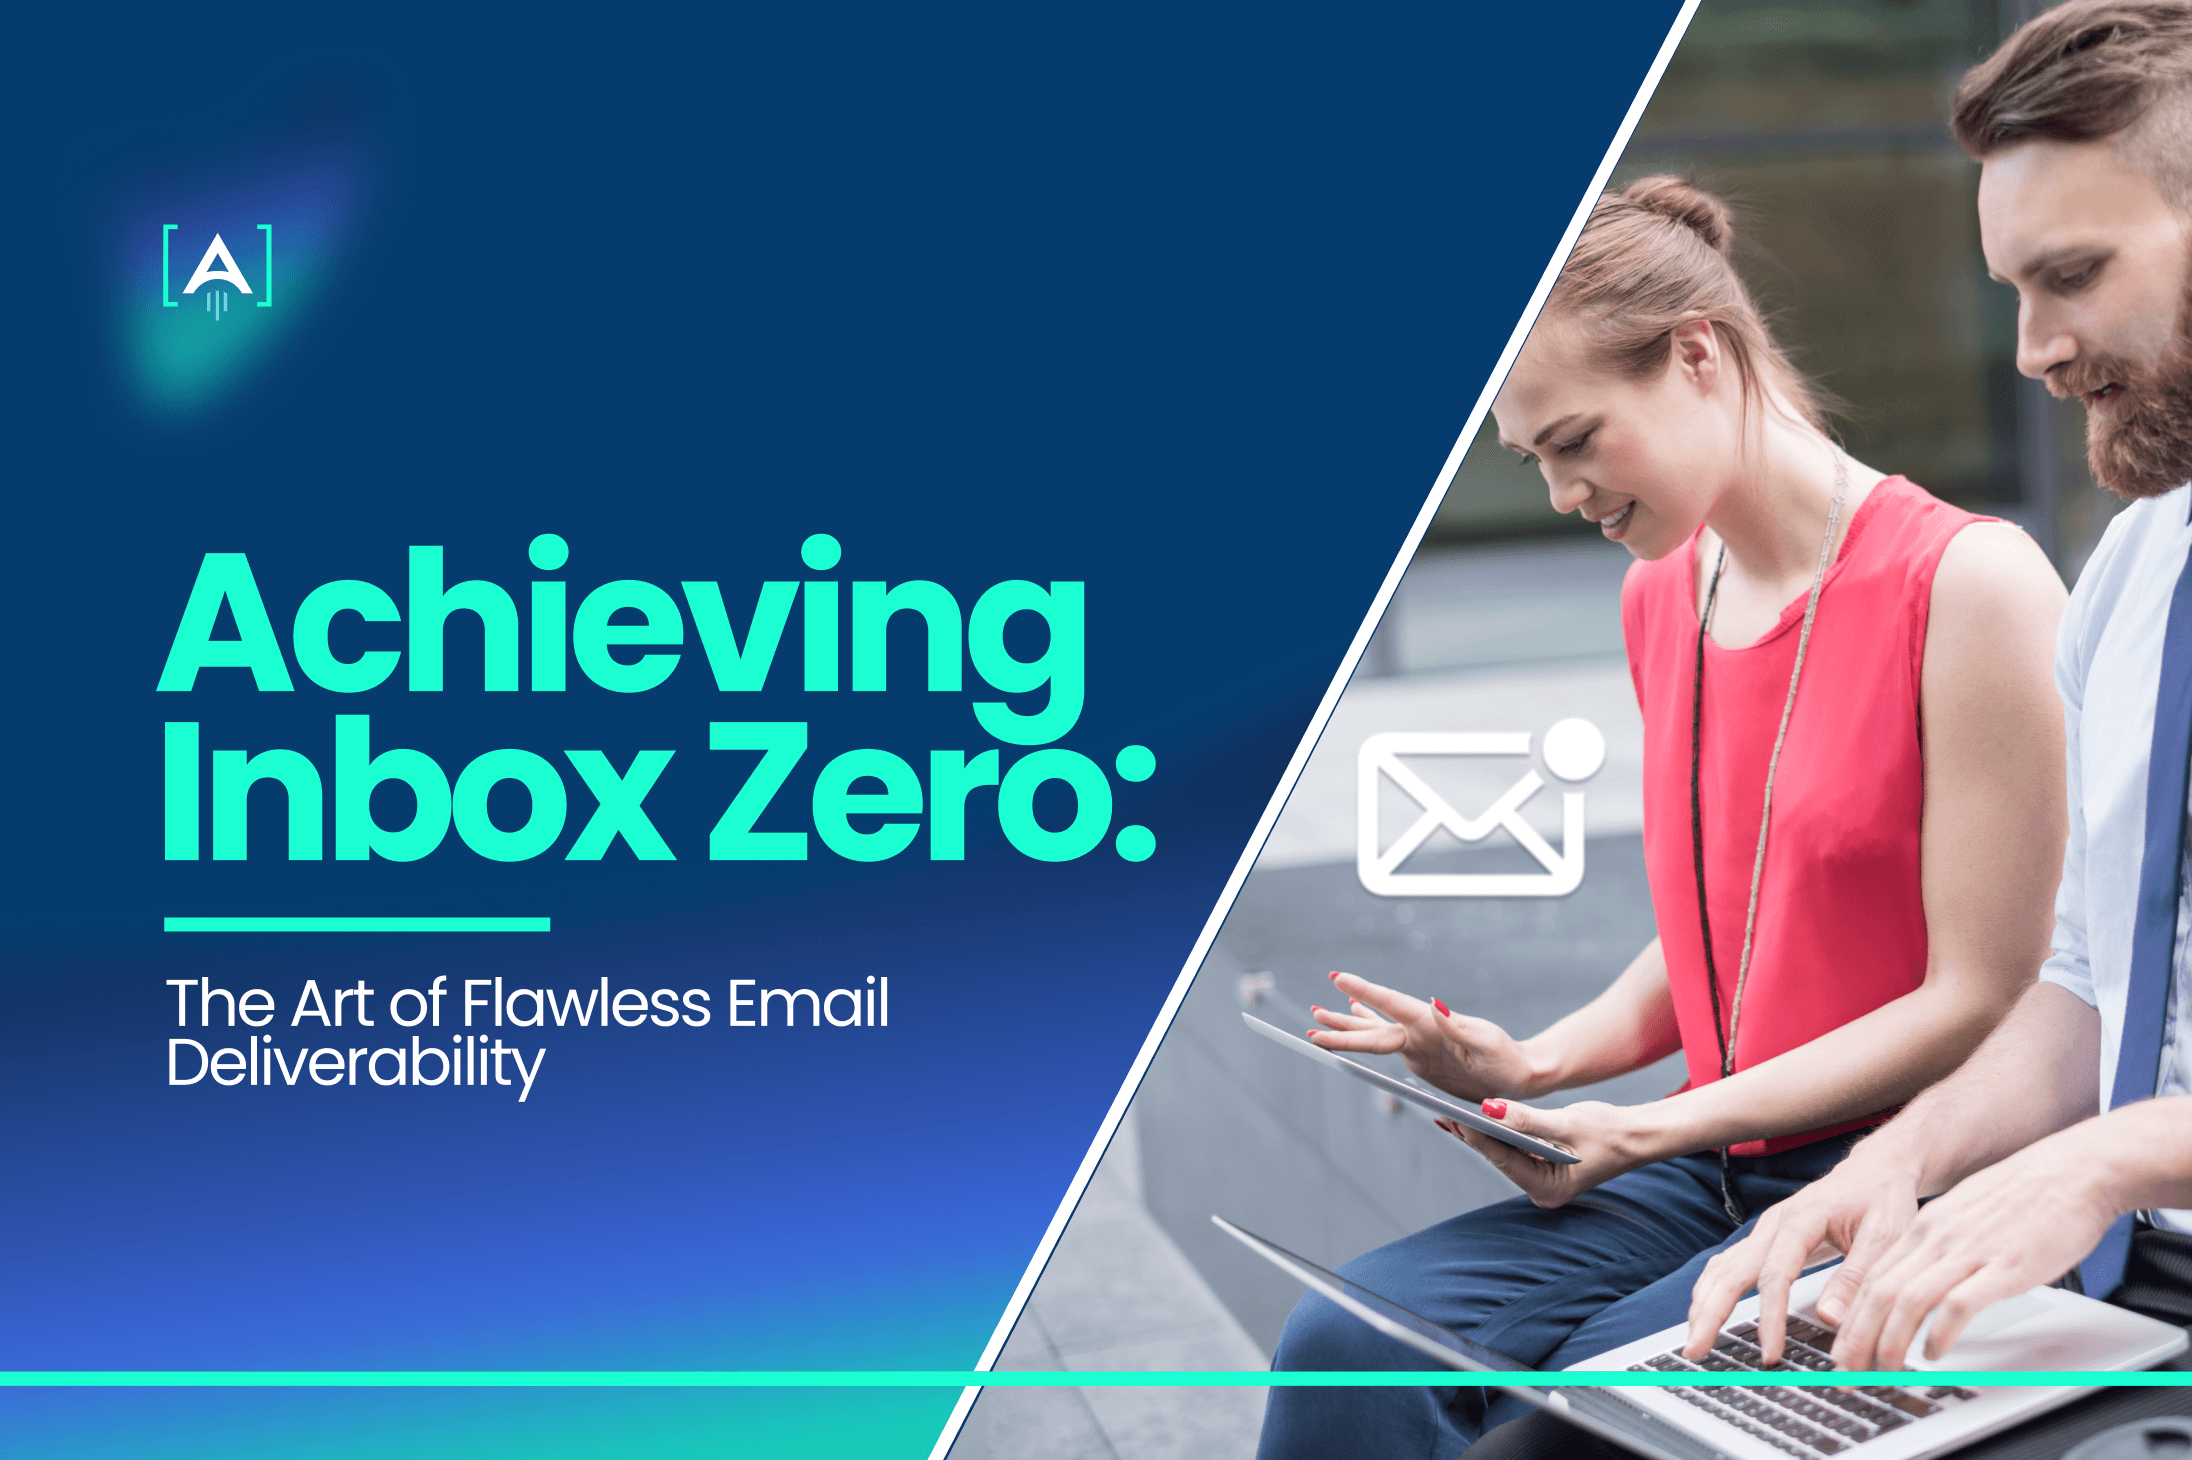 Achieving Inbox Zero The Art of Flawless Email Deliverability